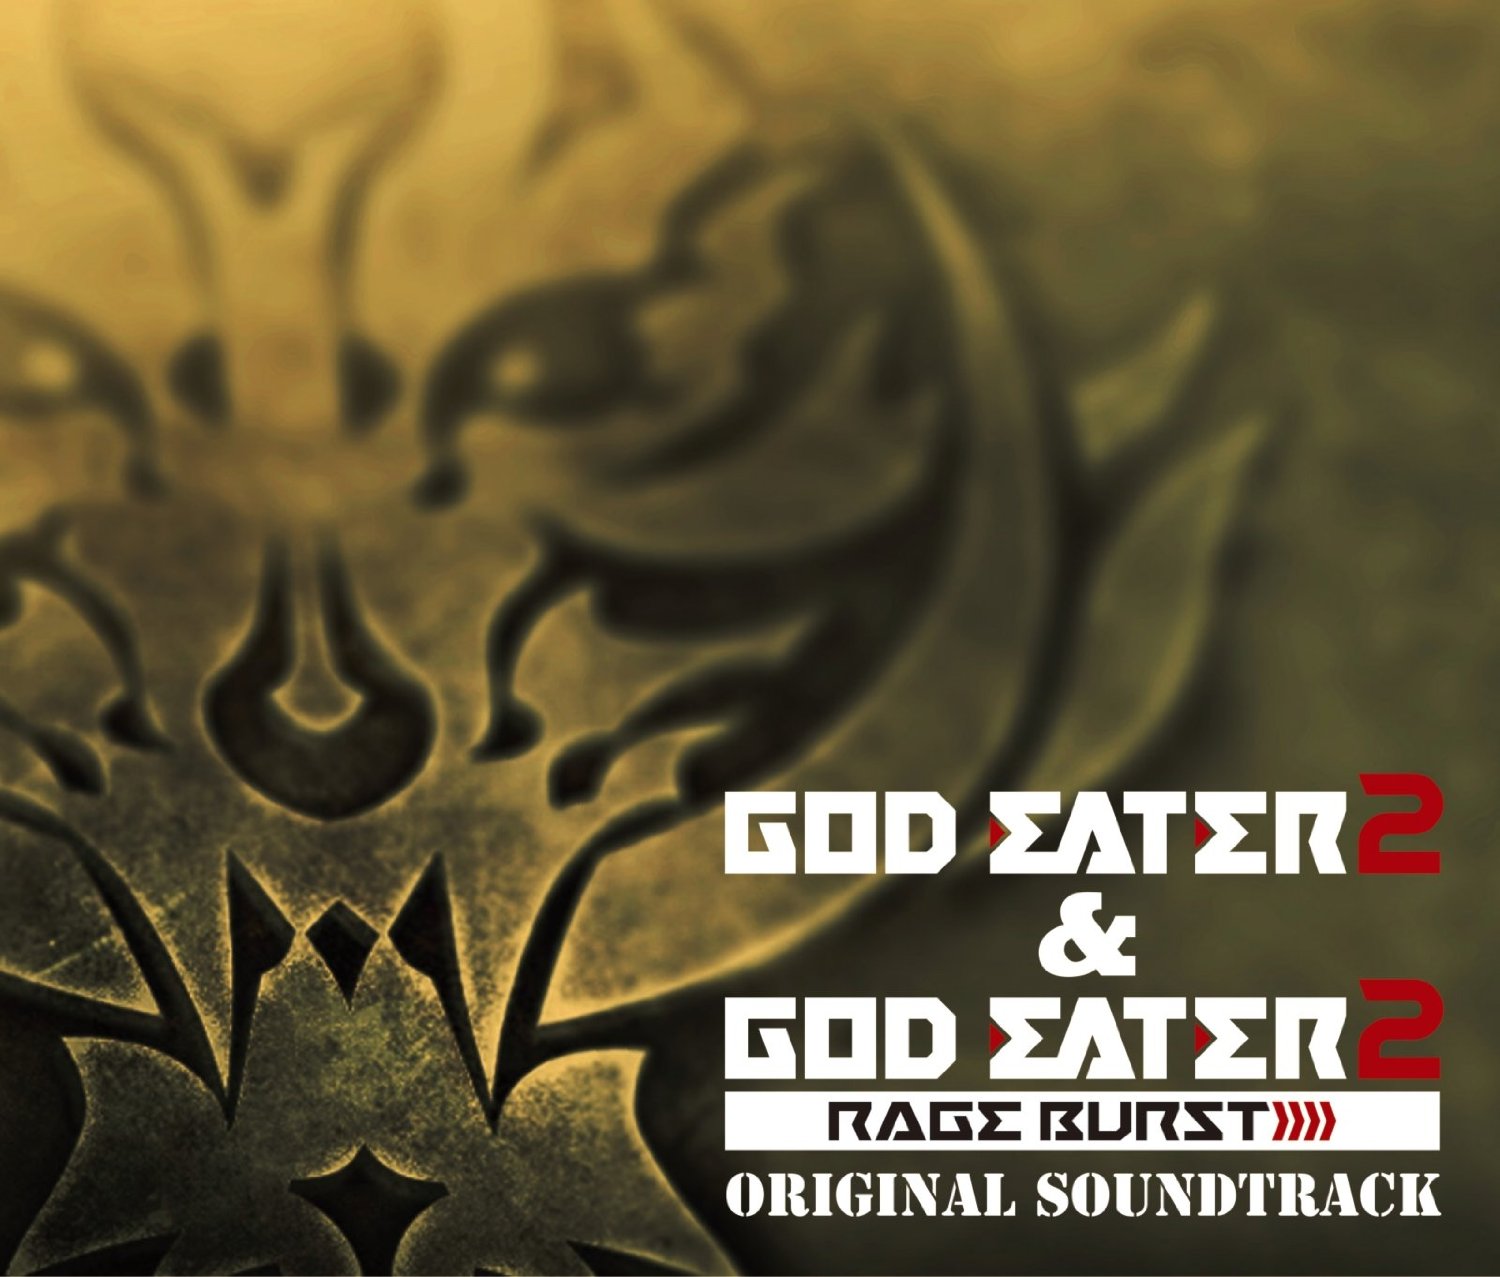 god eater 2 rage burst pc song cuts off